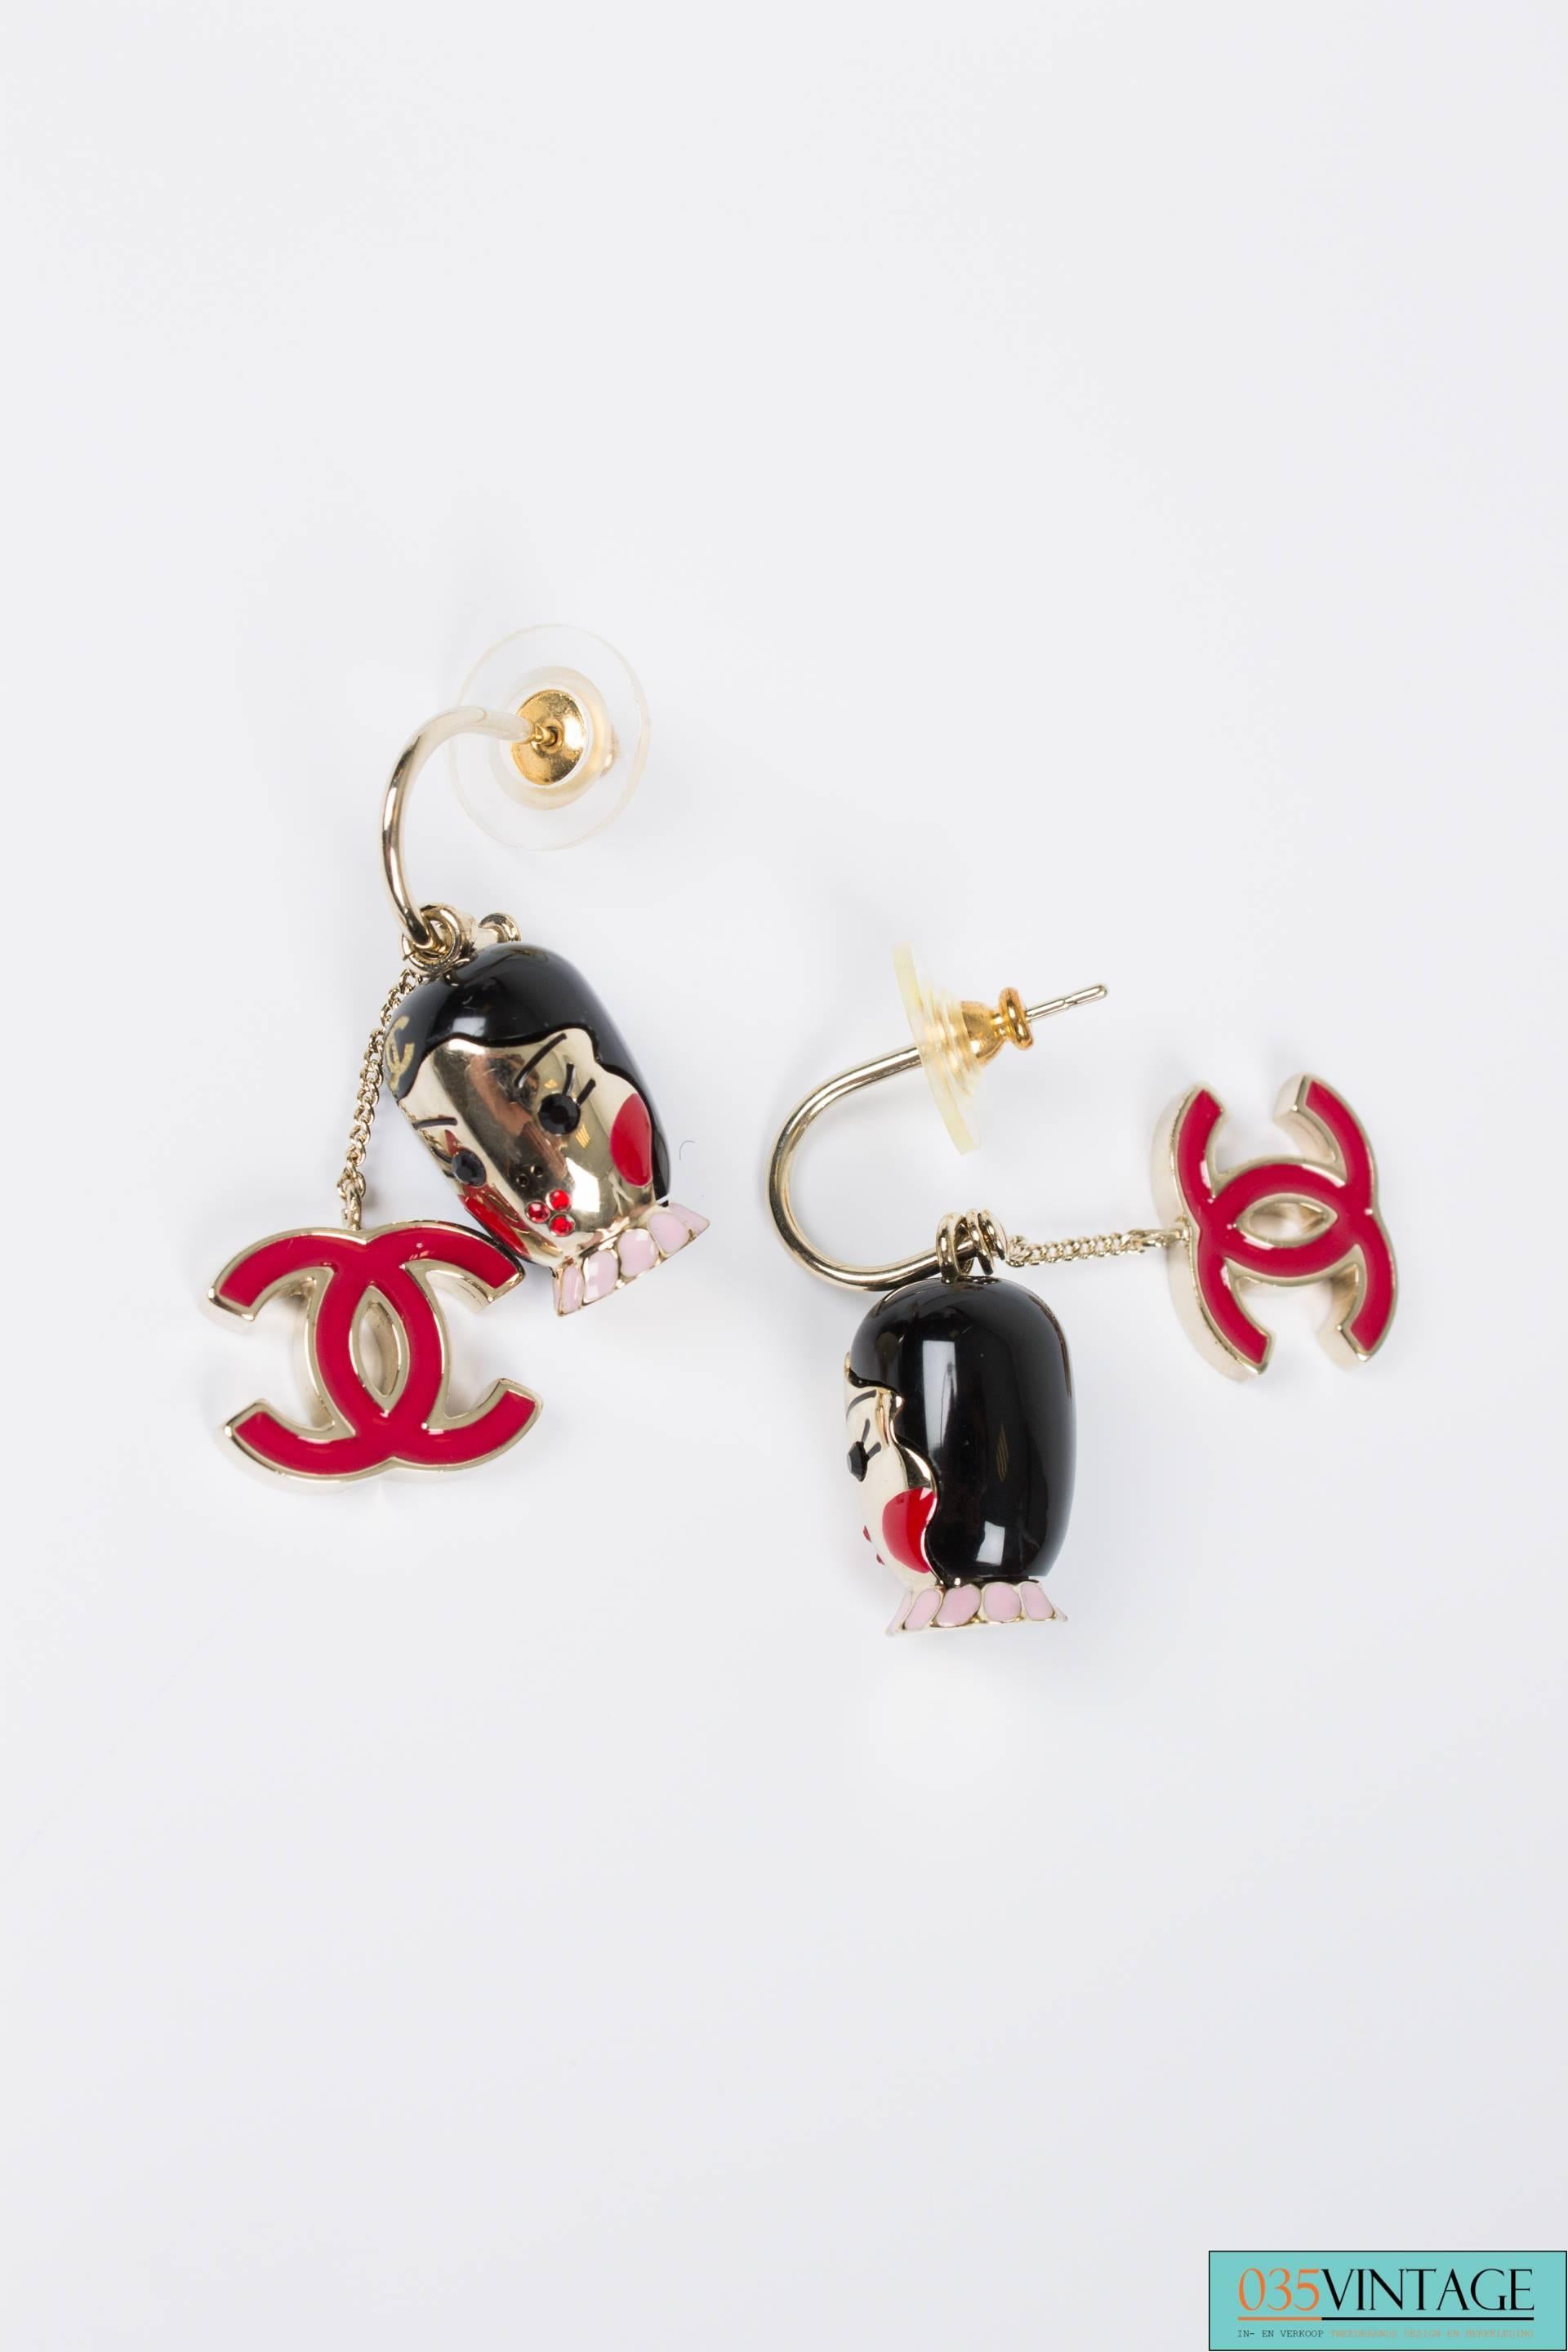 Earrings with charms by Chanel, extraordinary pretty!

The little silver earrings have a pin, the charms can be easily removed or changed. One charm holds a woman's head with black hair, red blusher and a red crystal mouth. A pink collar and a